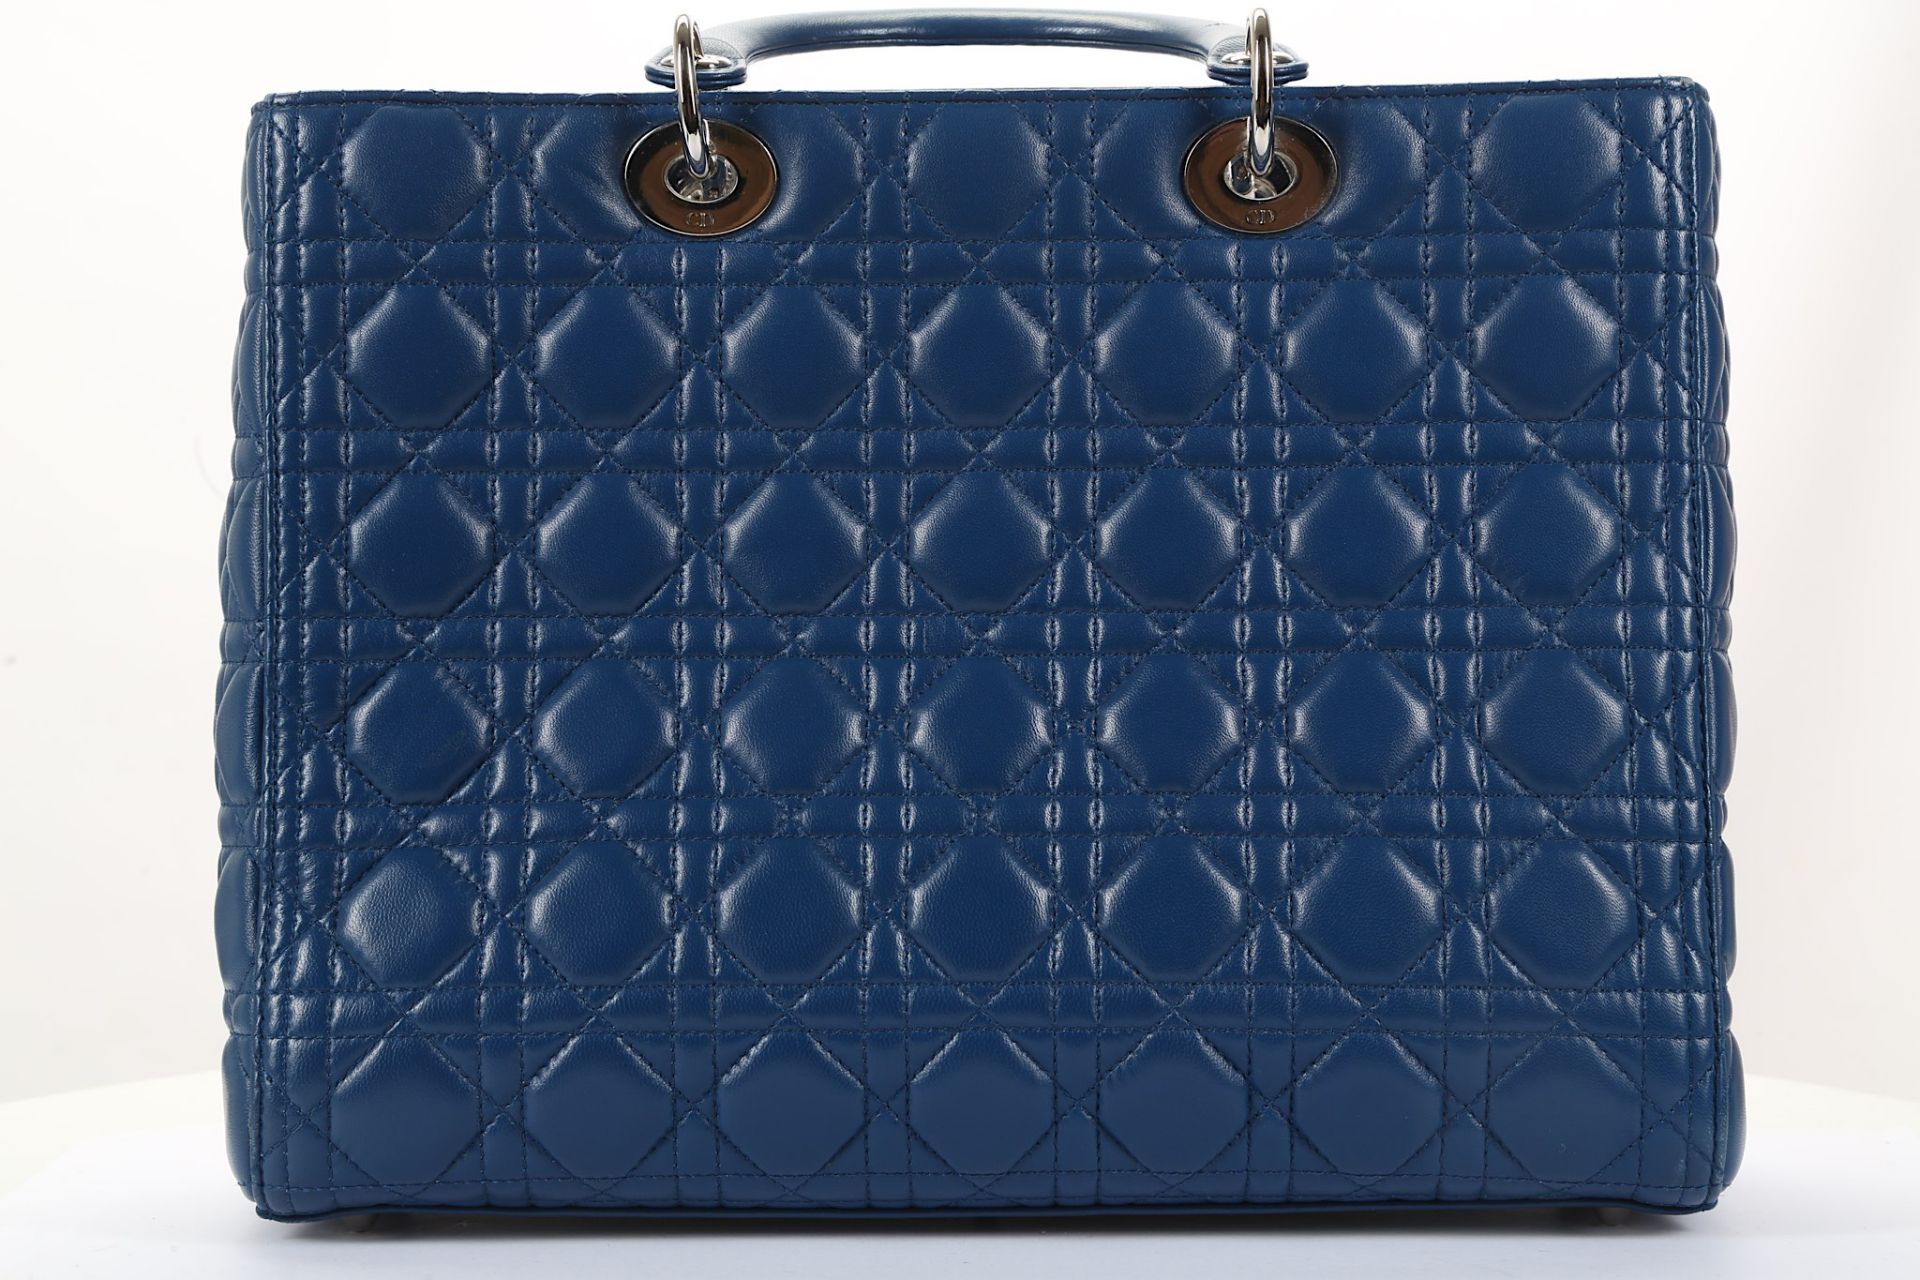 Christian Dior Blue Large Lady Dior Tote, Cannage - Image 4 of 7